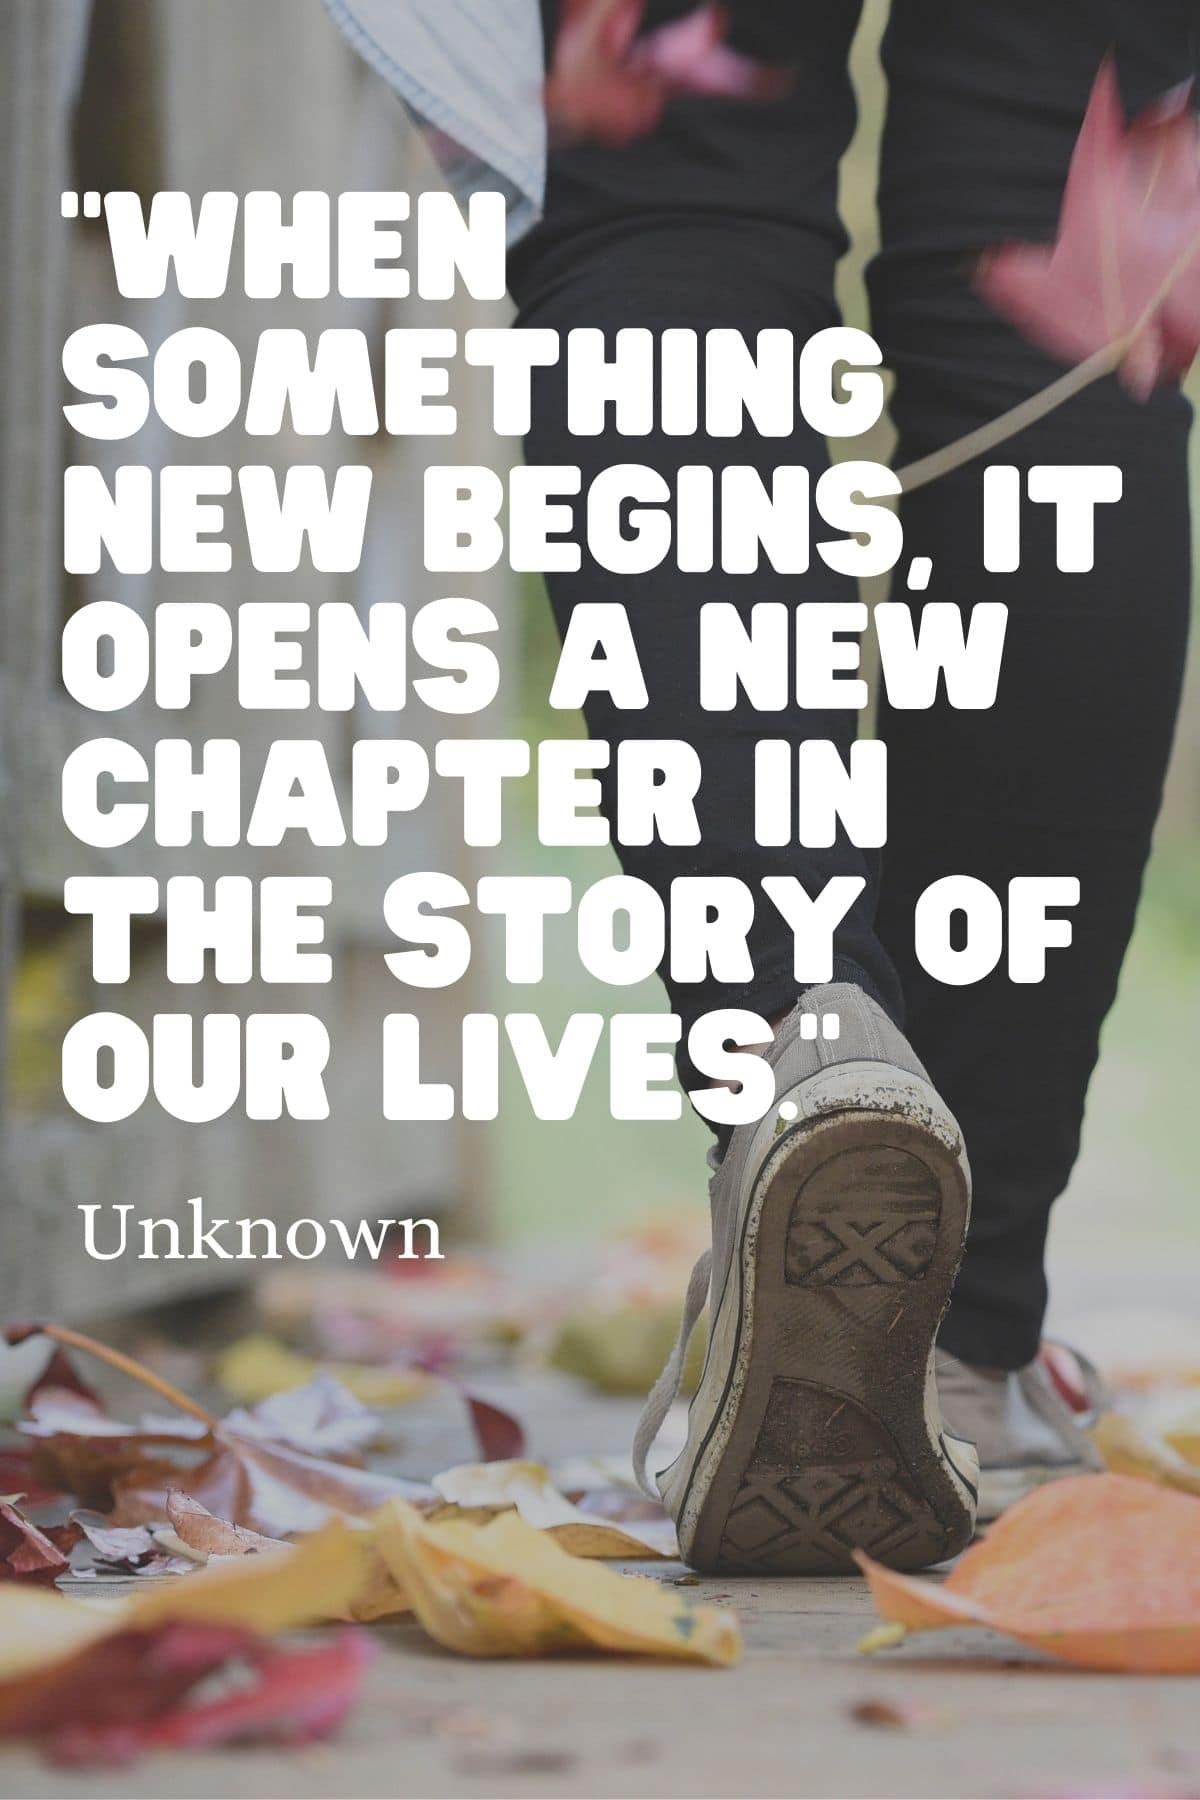 "When something new begins, it opens a new chapter in the story of our lives." – Unknown start quote